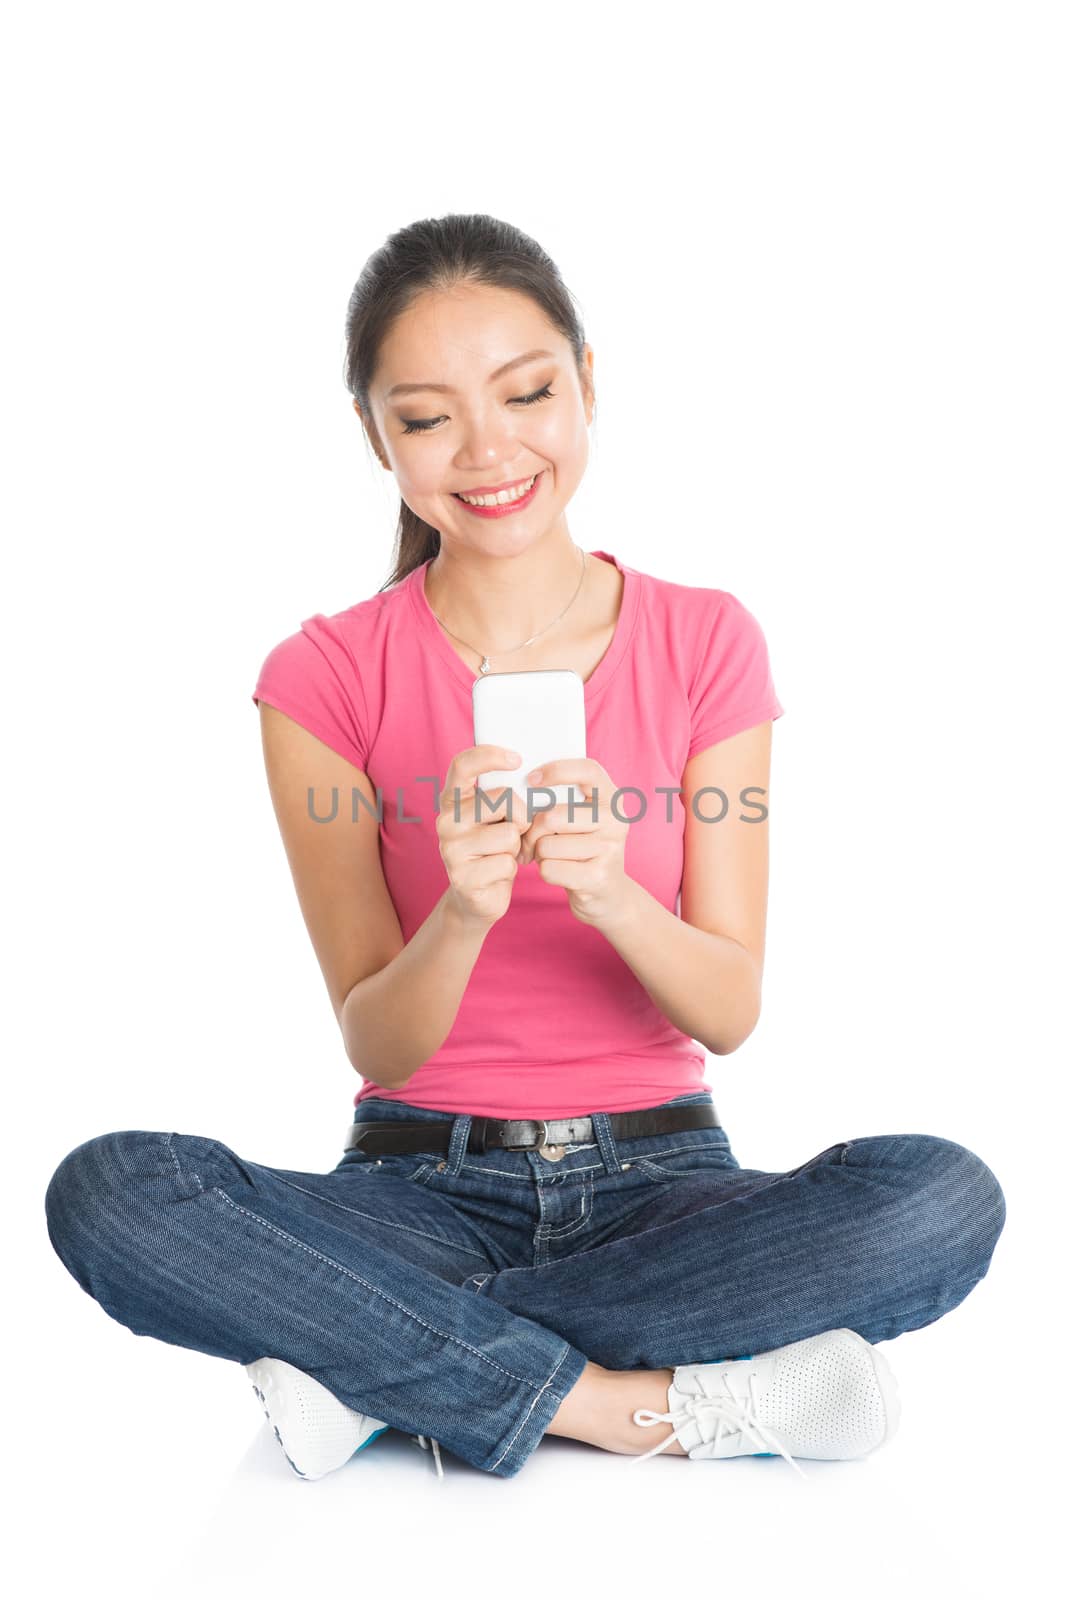 Full body young Asian woman in pink shirt texting with smartphone, seated on floor, full length isolated on white background.